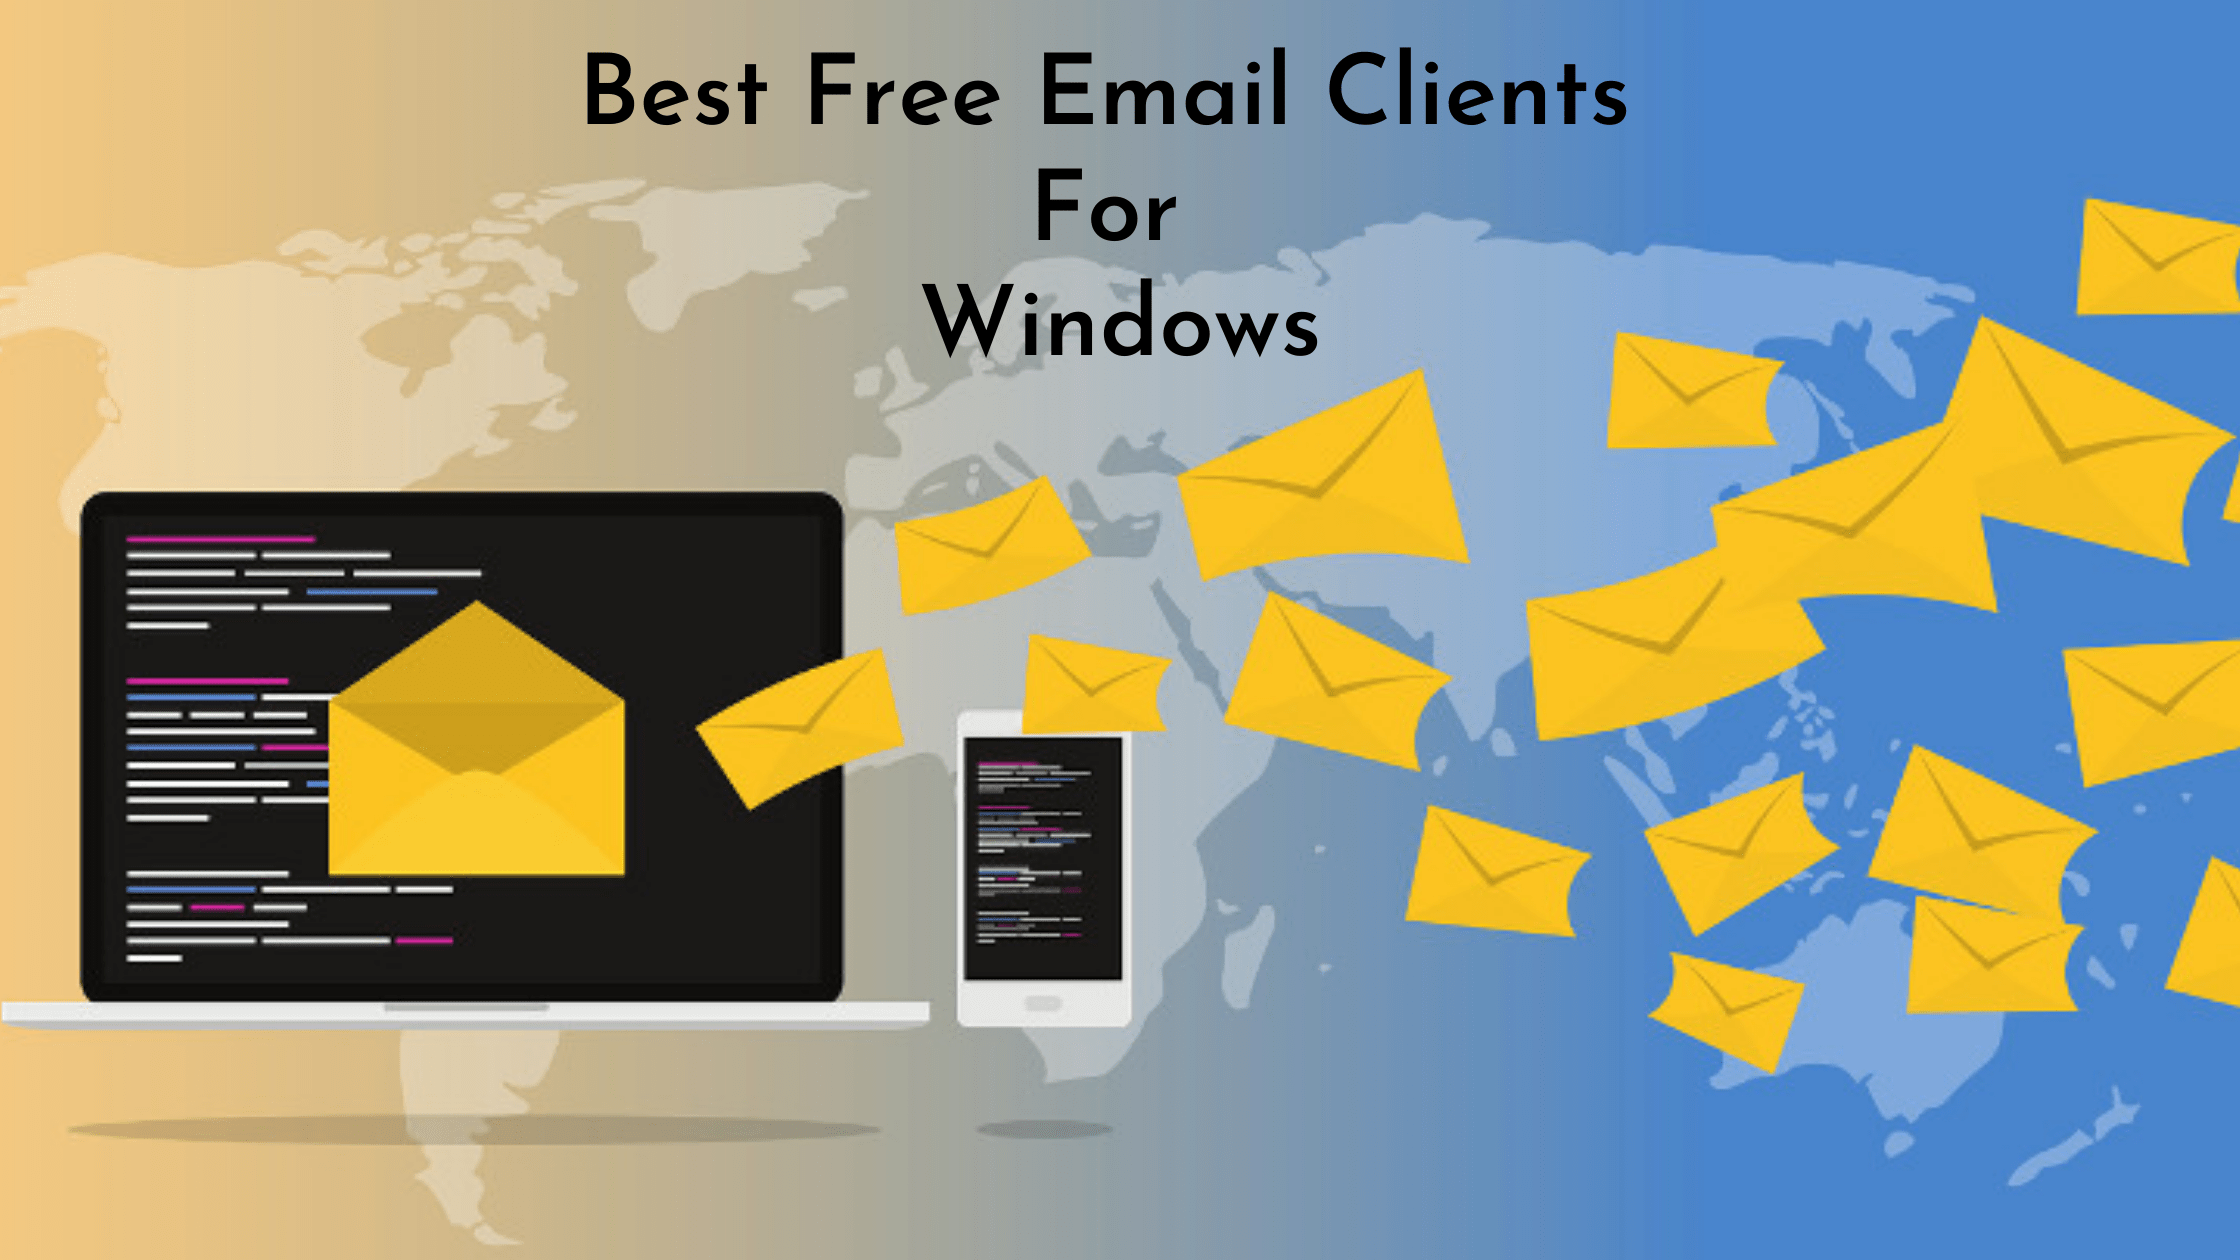 Best Free Email Clients For Windows